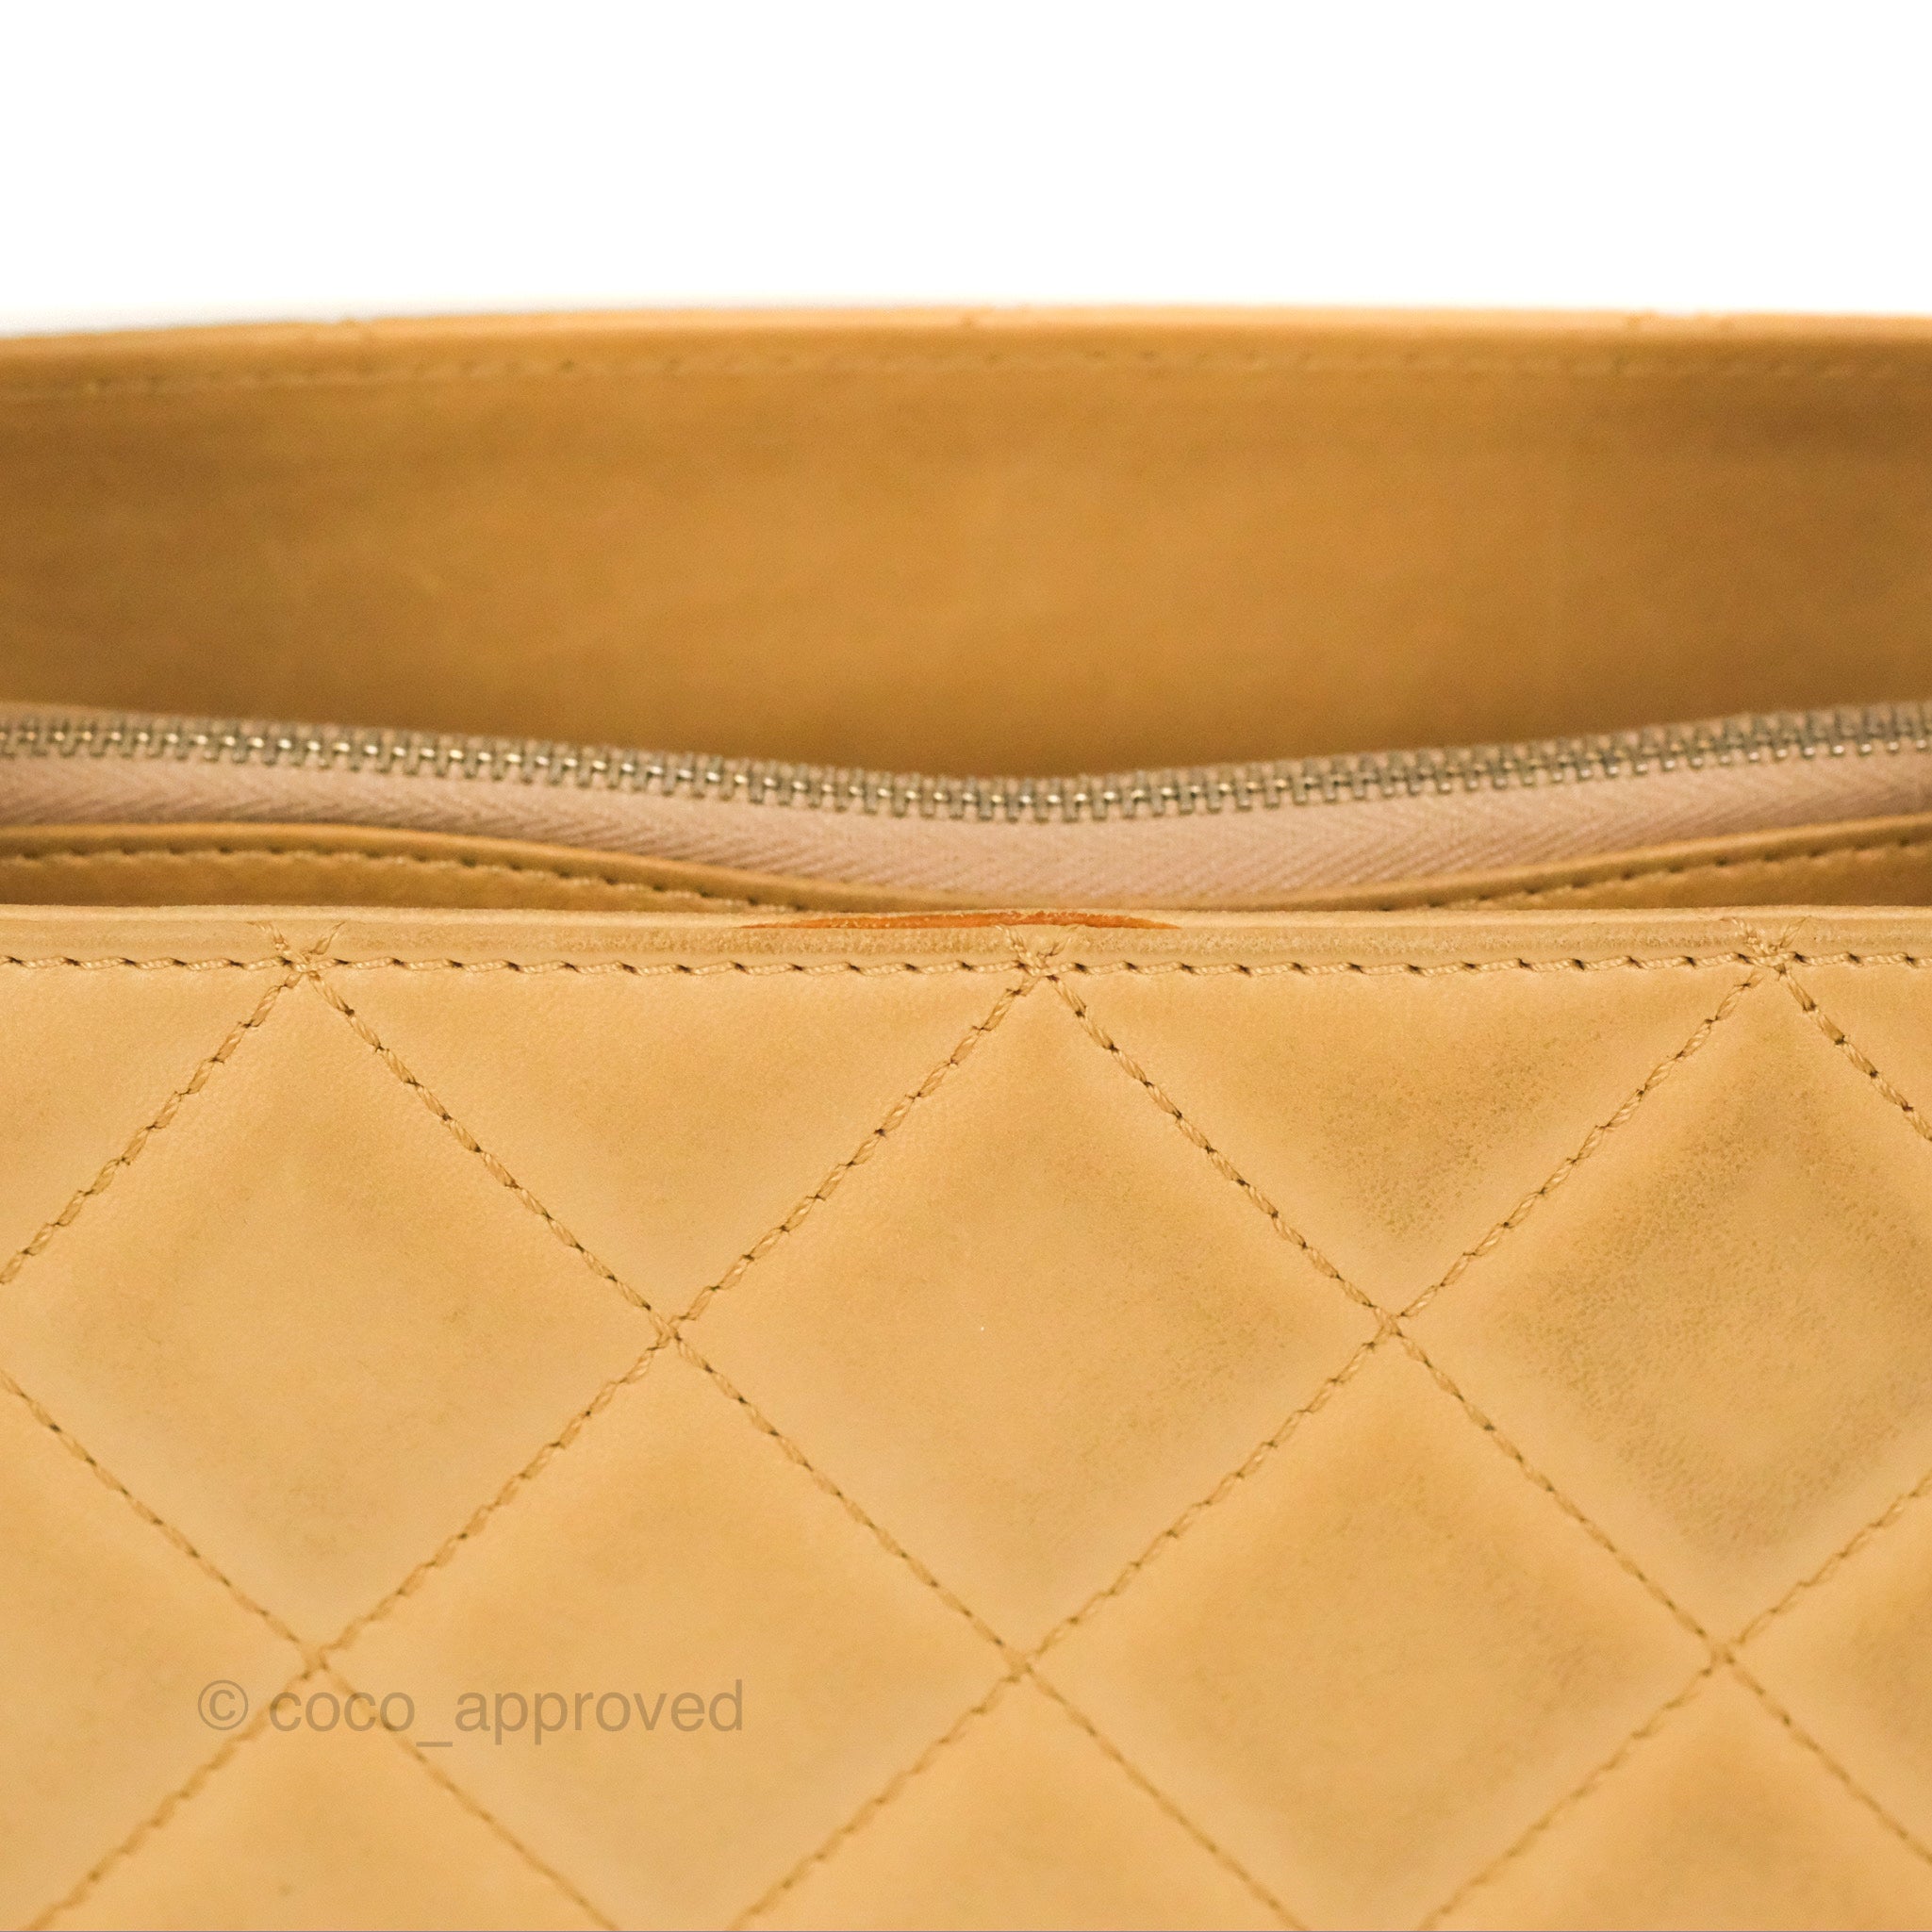 Chanel Quilted Lambskin Bar Clutch Bag